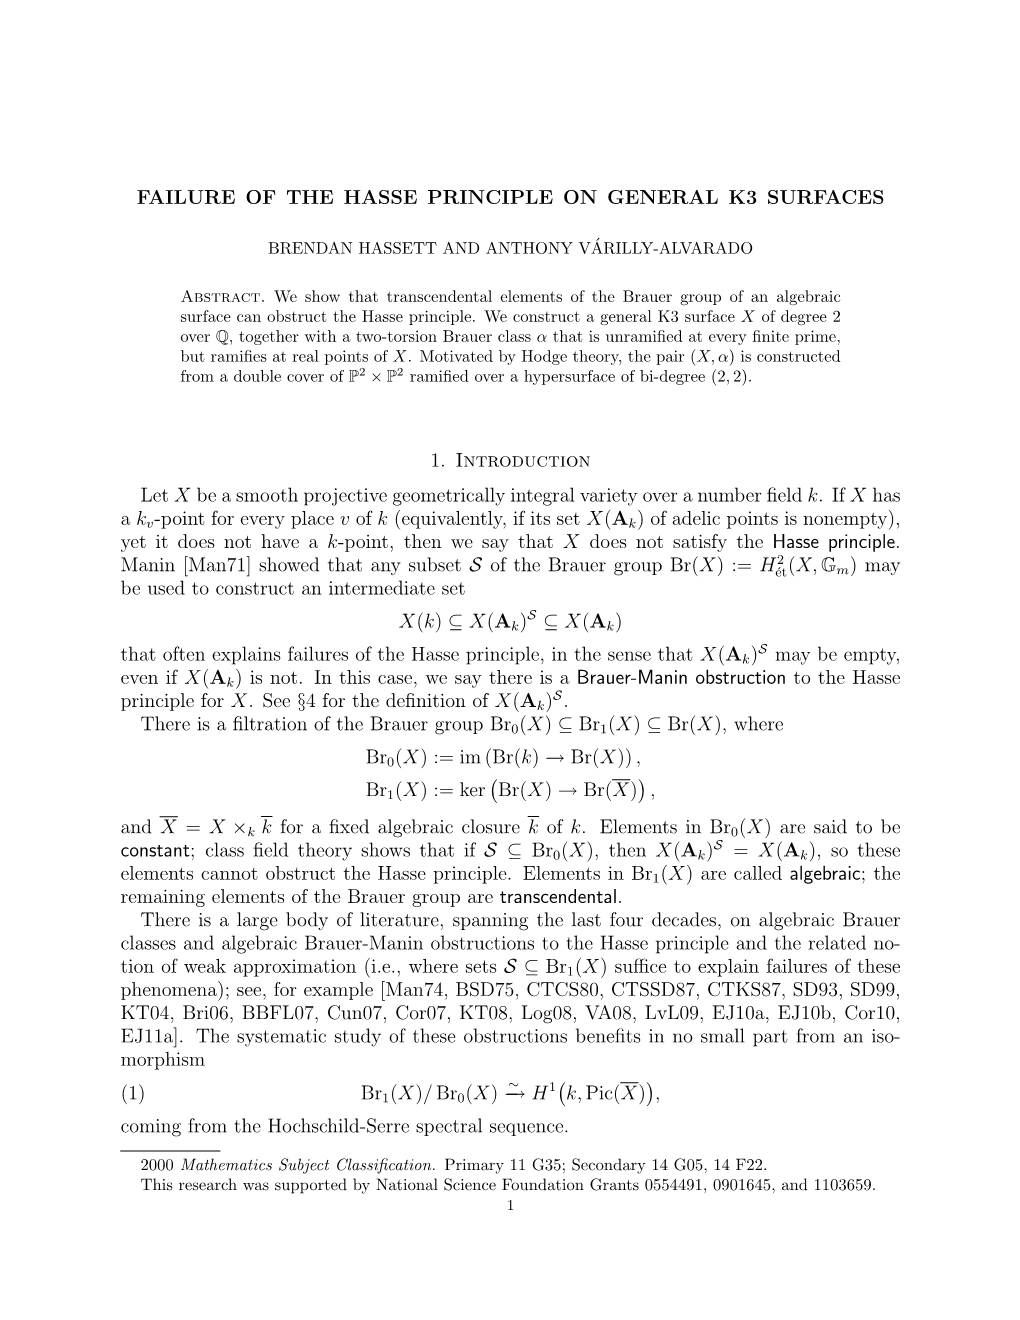 Failure of the Hasse Principle on General K3 Surfaces